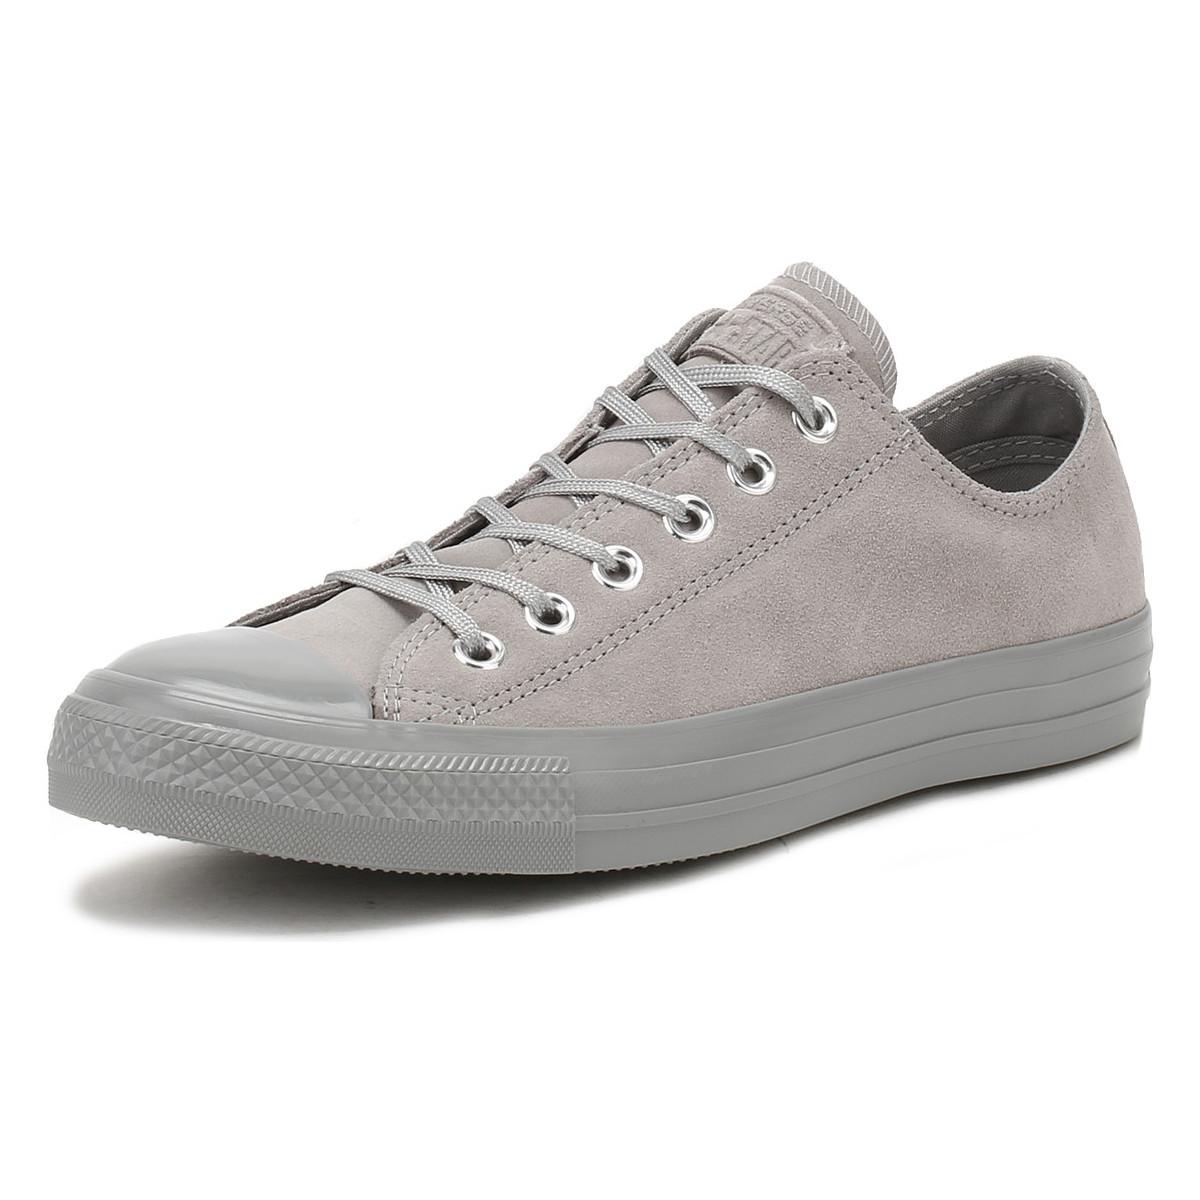 converse all star low leather trainers porpoise vapour pink